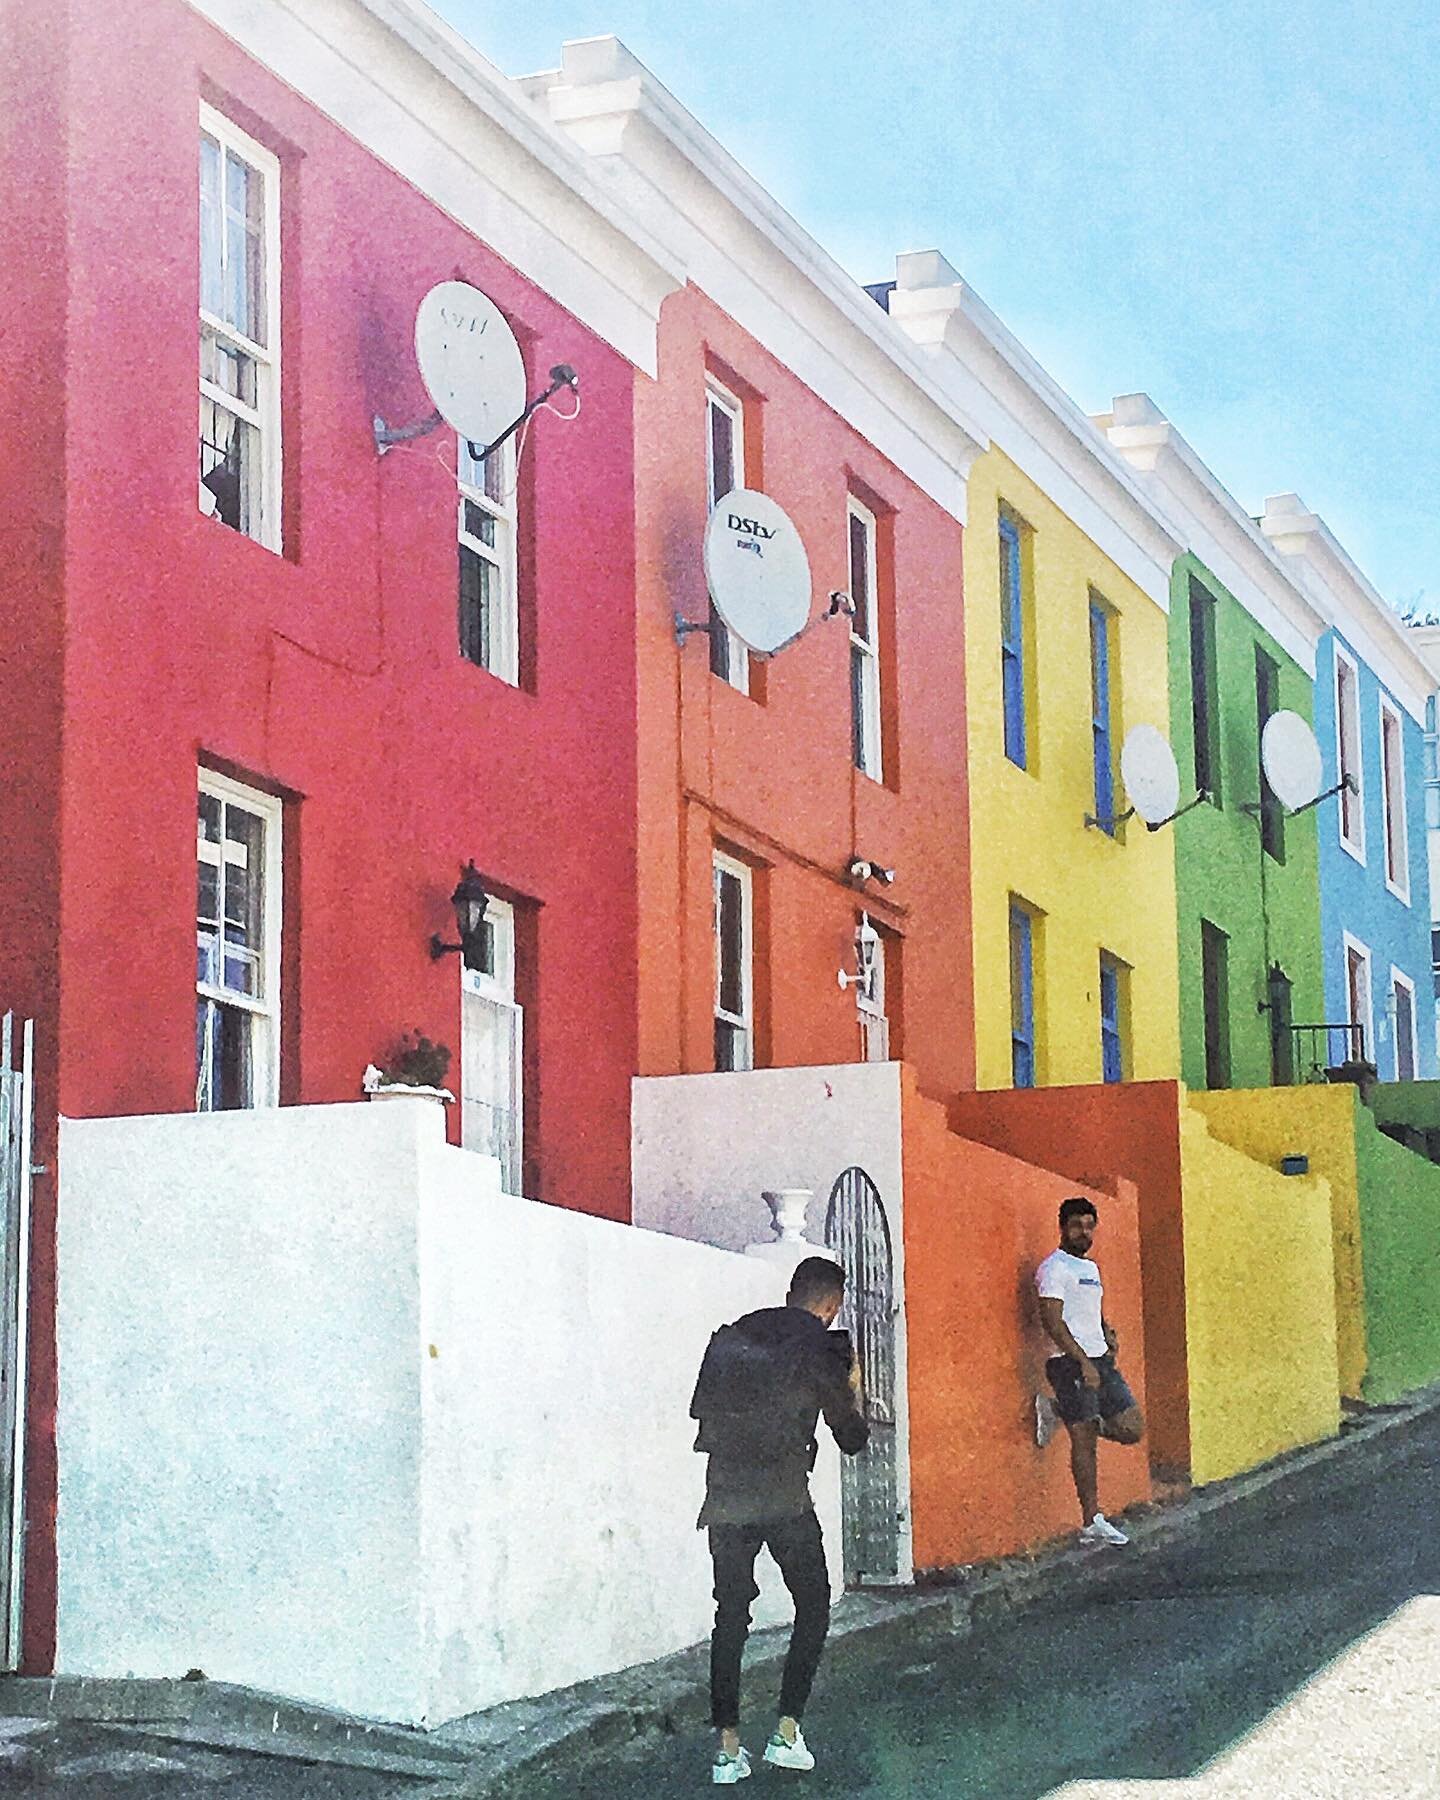 Throwing back to this place - #capetown, right up there with my favourite cities. So much colour and interior inspiration, everywhere. And let&rsquo;s not even talk about the sea, mountains, culture, art, shopping and cuisine to die for... #anafrican